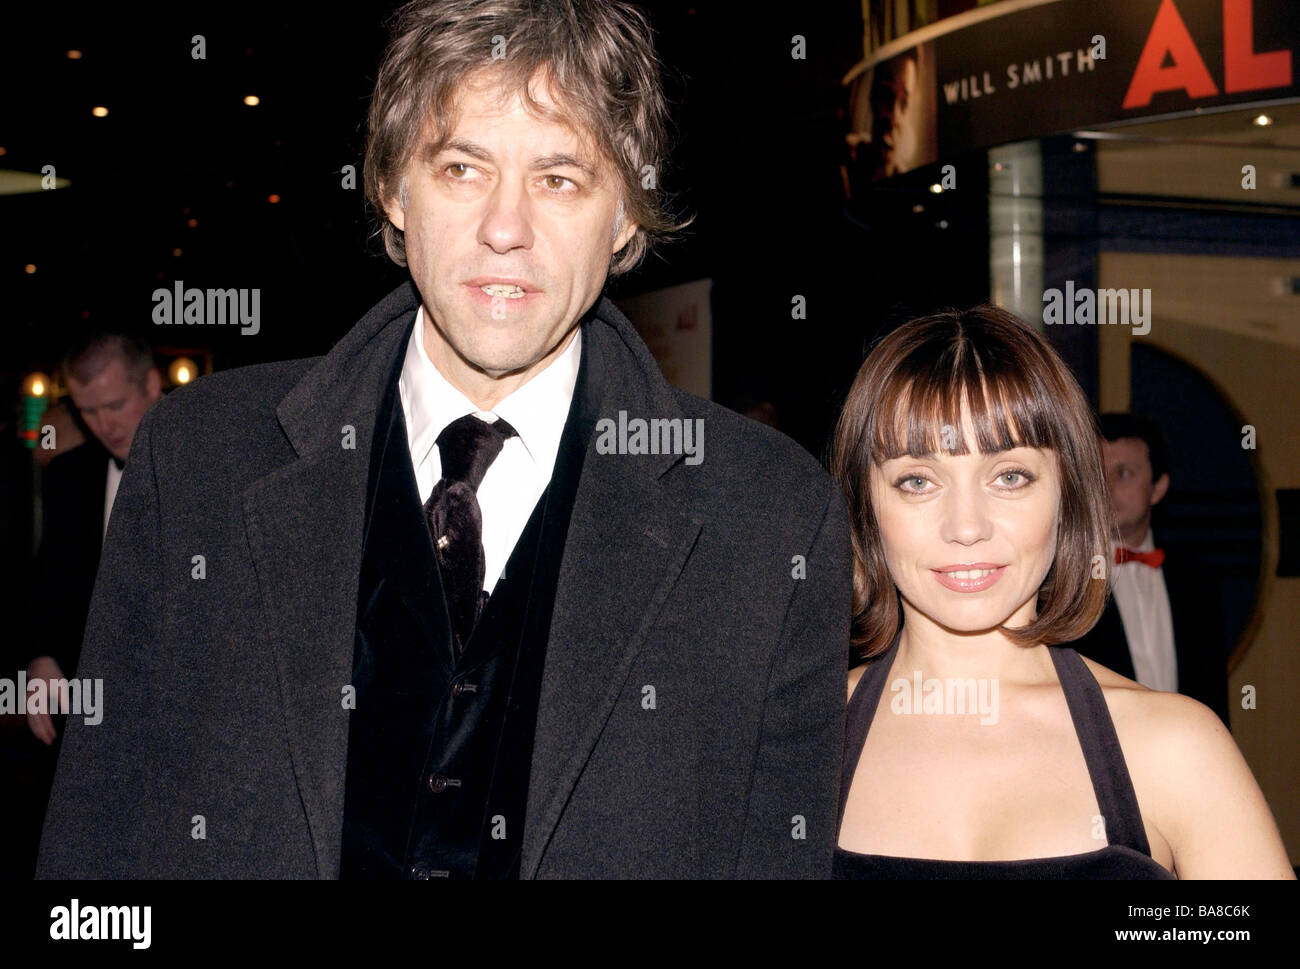 MUSICIAN BOB GELDOF WITH GIRLFRIEND JEANNE MARINE AT CHARITY FILM PREMIERE OF THE FILM ALI IN LEICESTER SQUARE LONDON Stock Photo